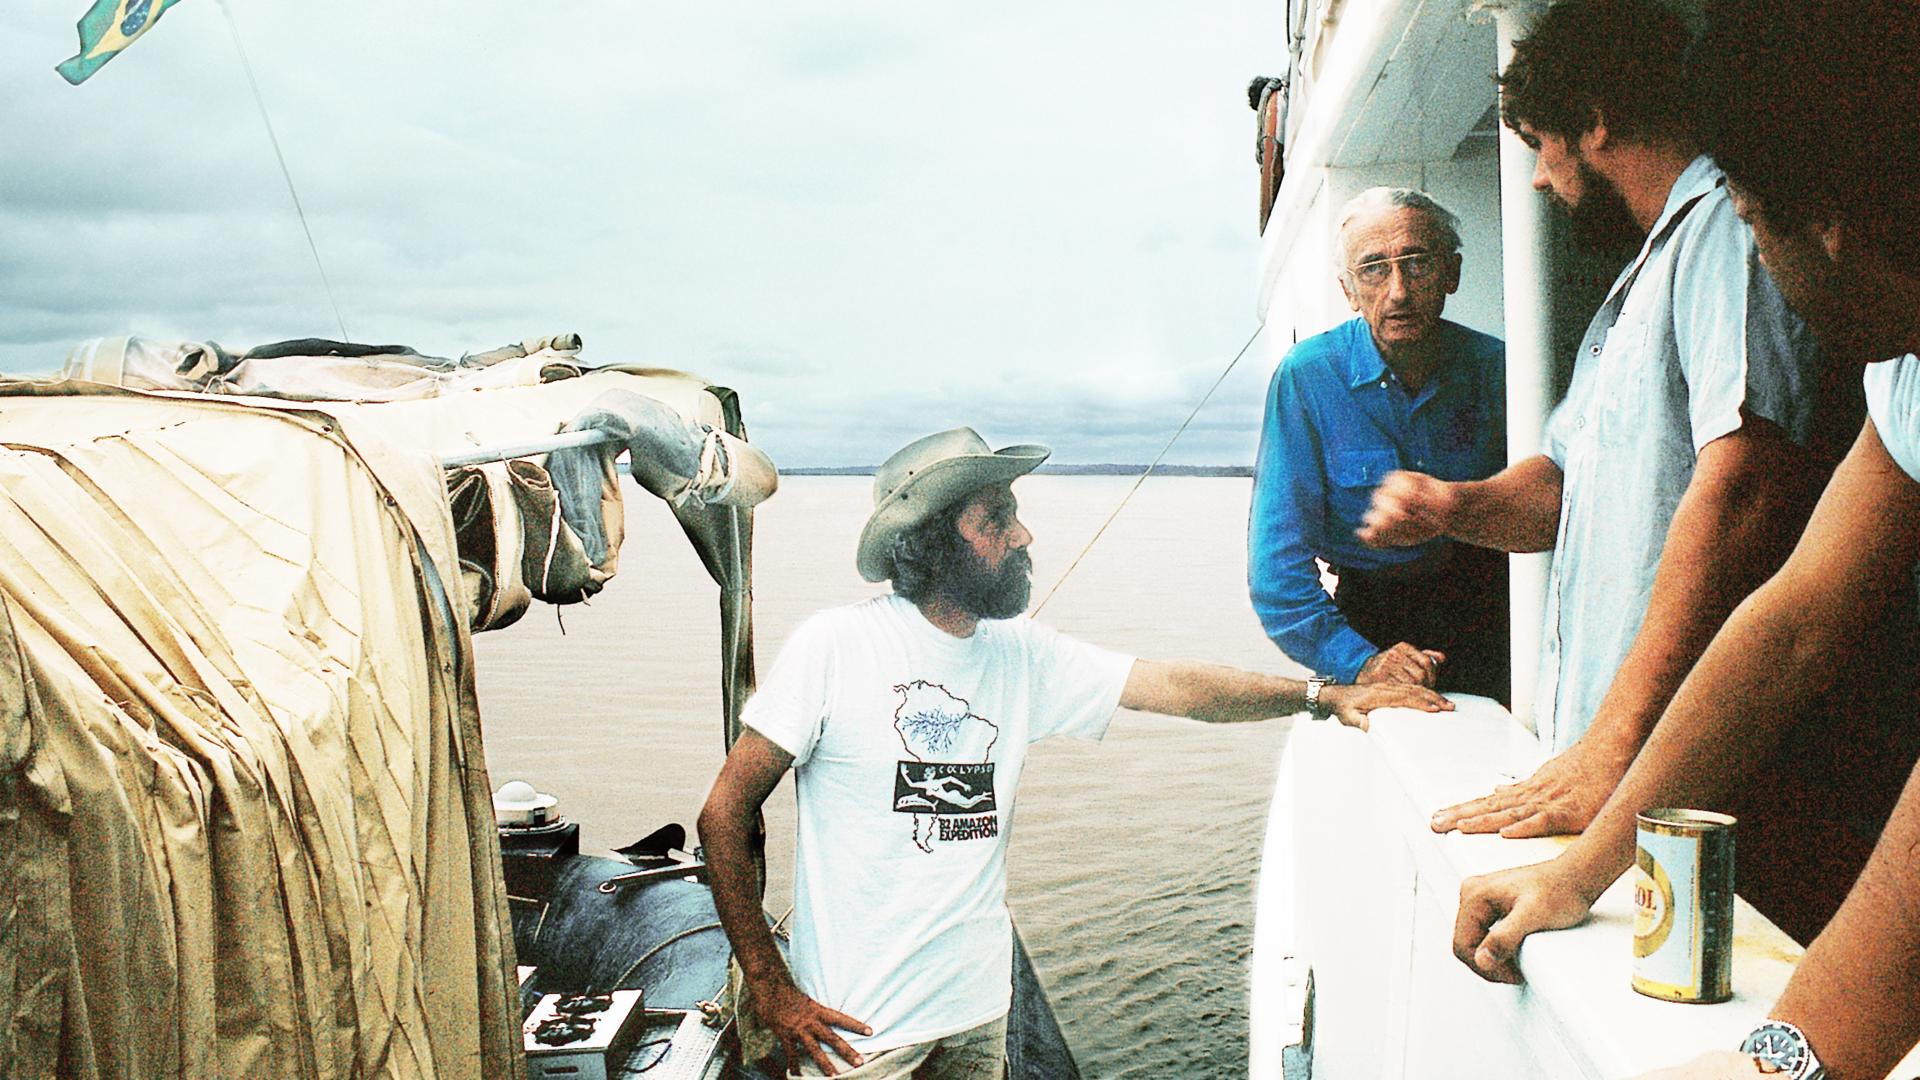 My Father the Captain: Jacques-Yves Cousteau